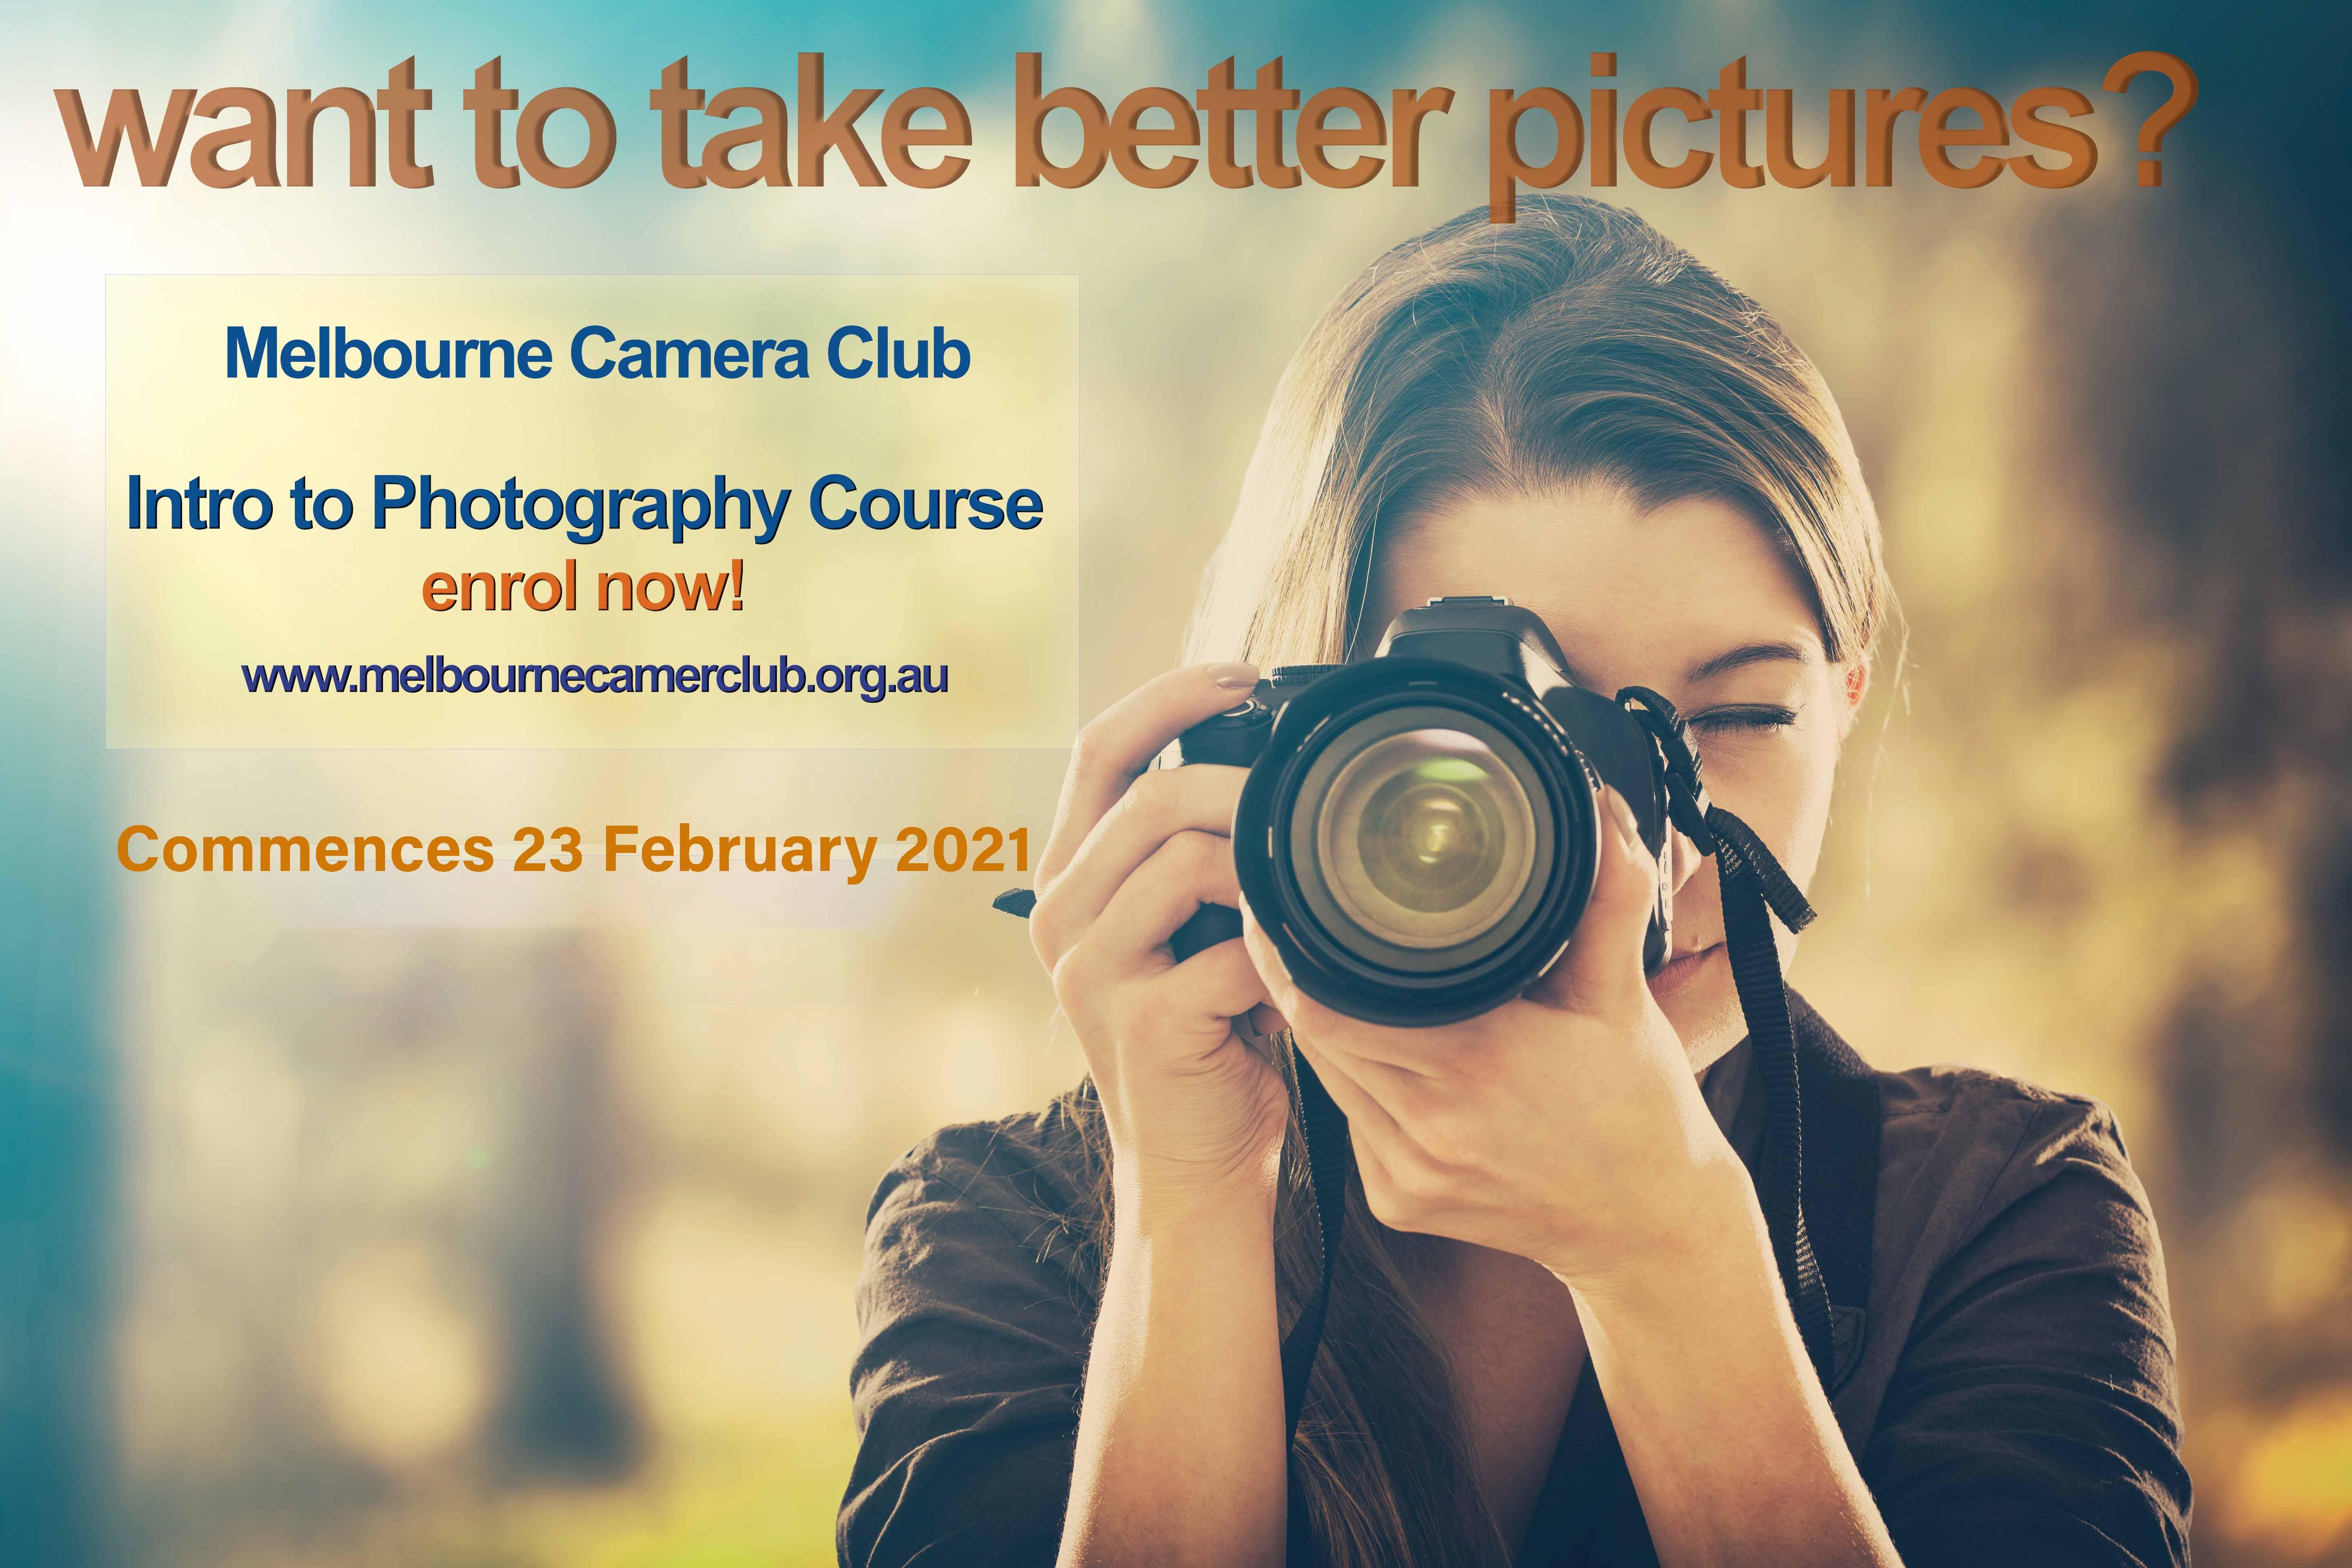 Introduction to Photography Course